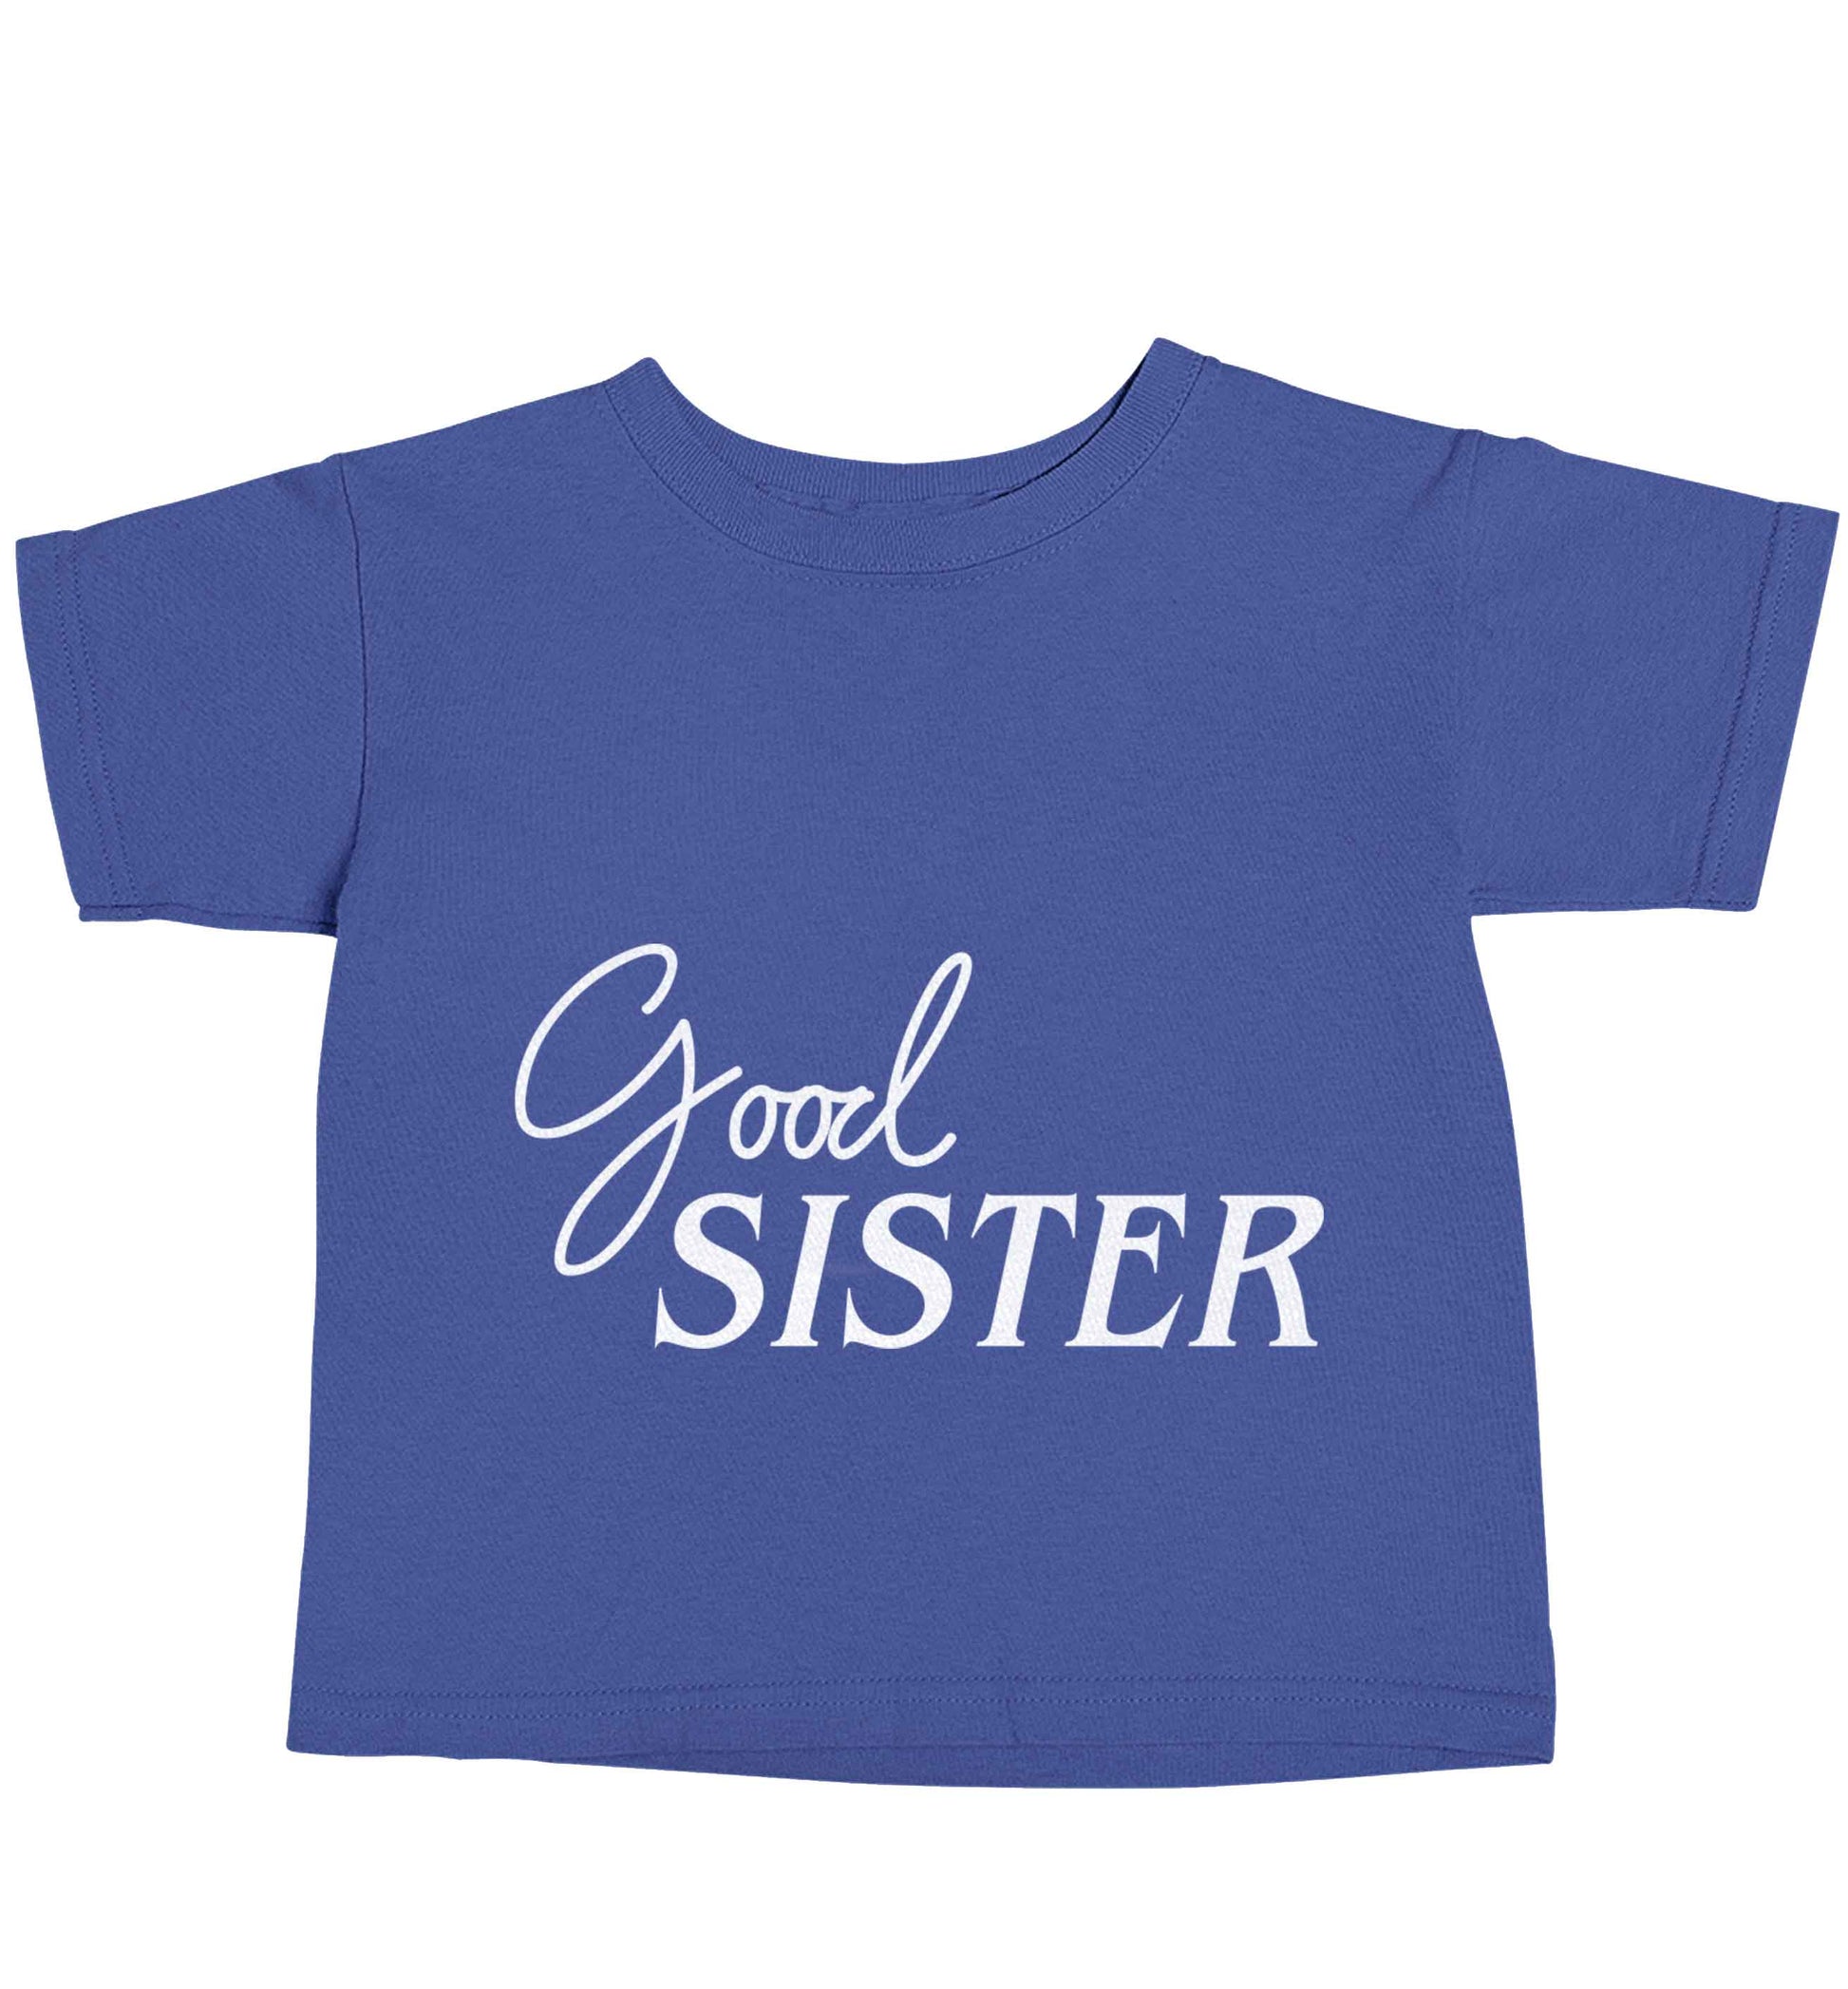 Good sister blue baby toddler Tshirt 2 Years